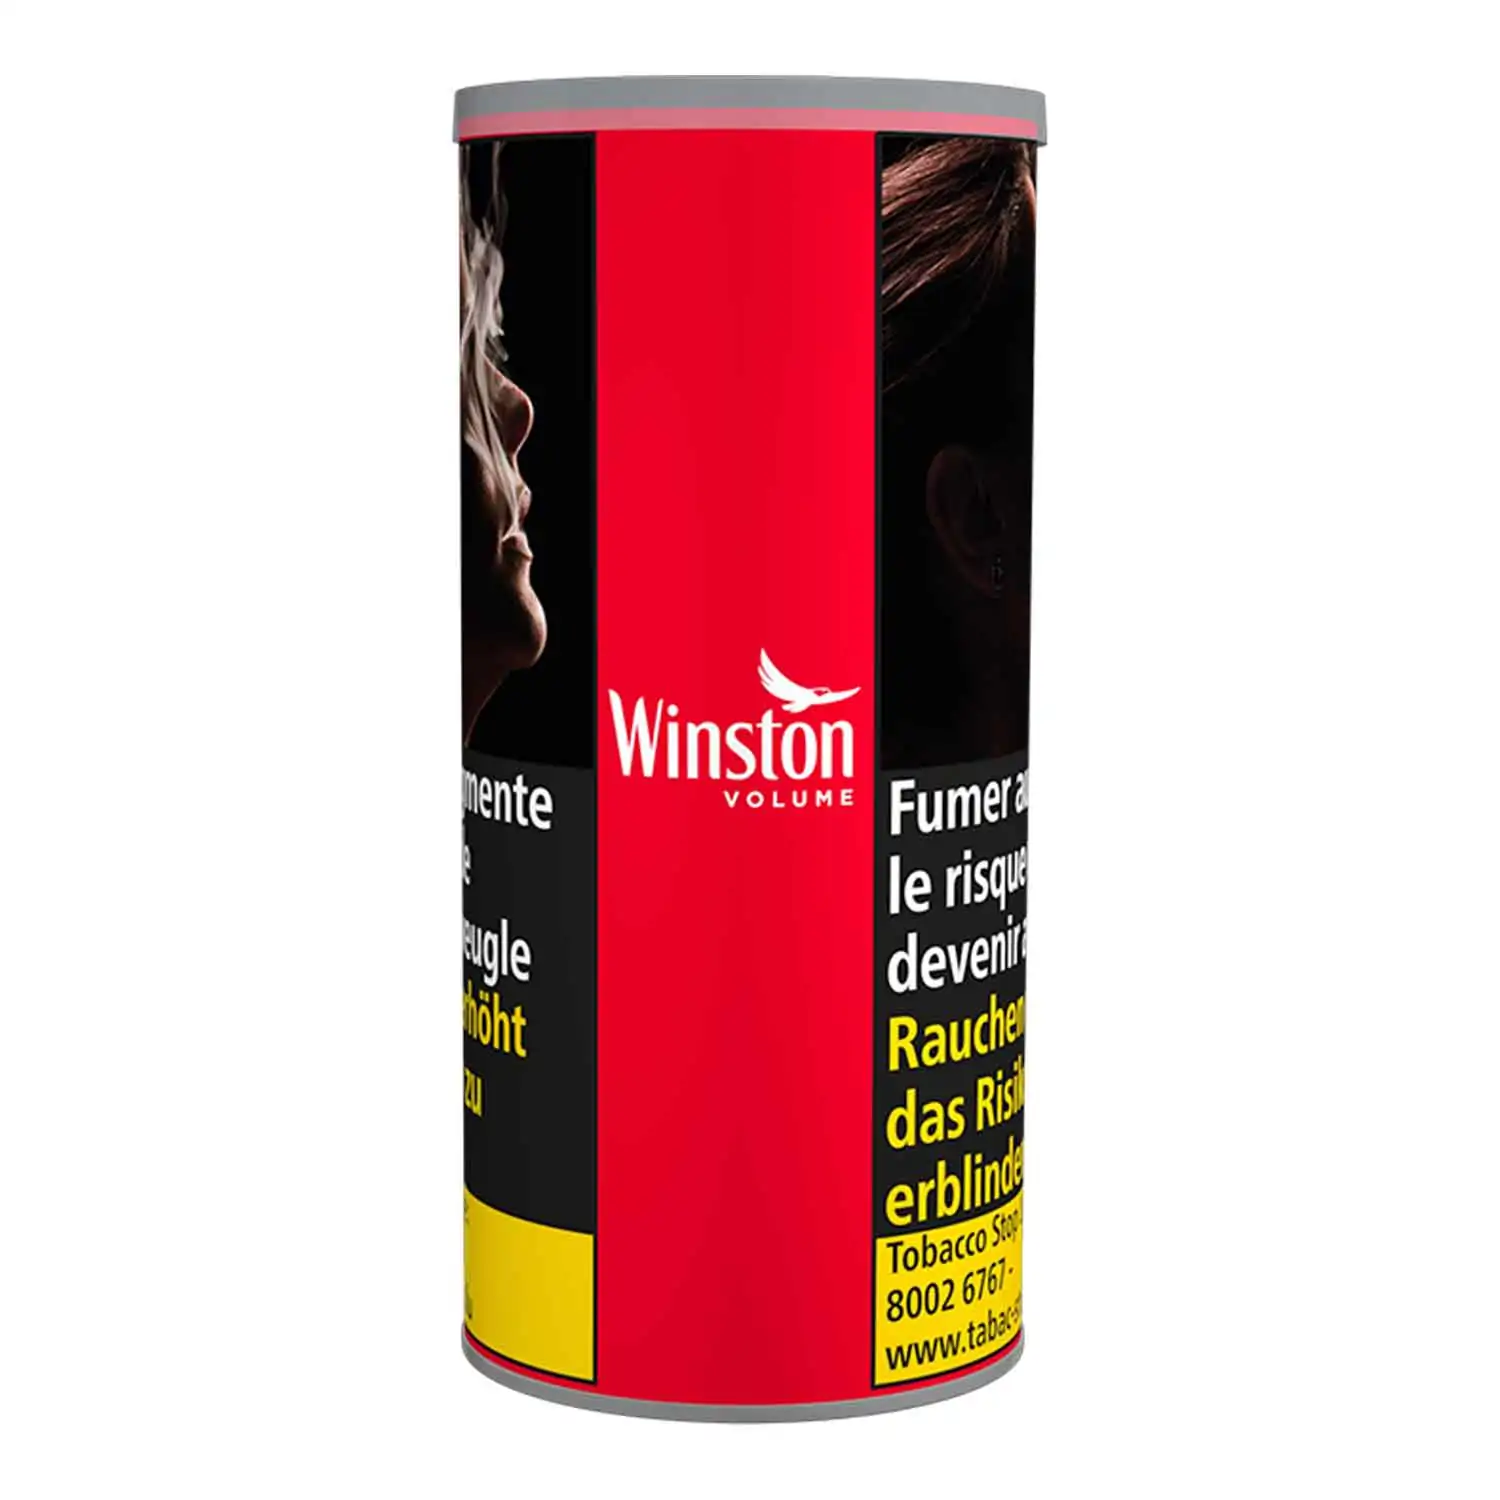 Winston volume rouge 125g - Buy at Real Tobacco